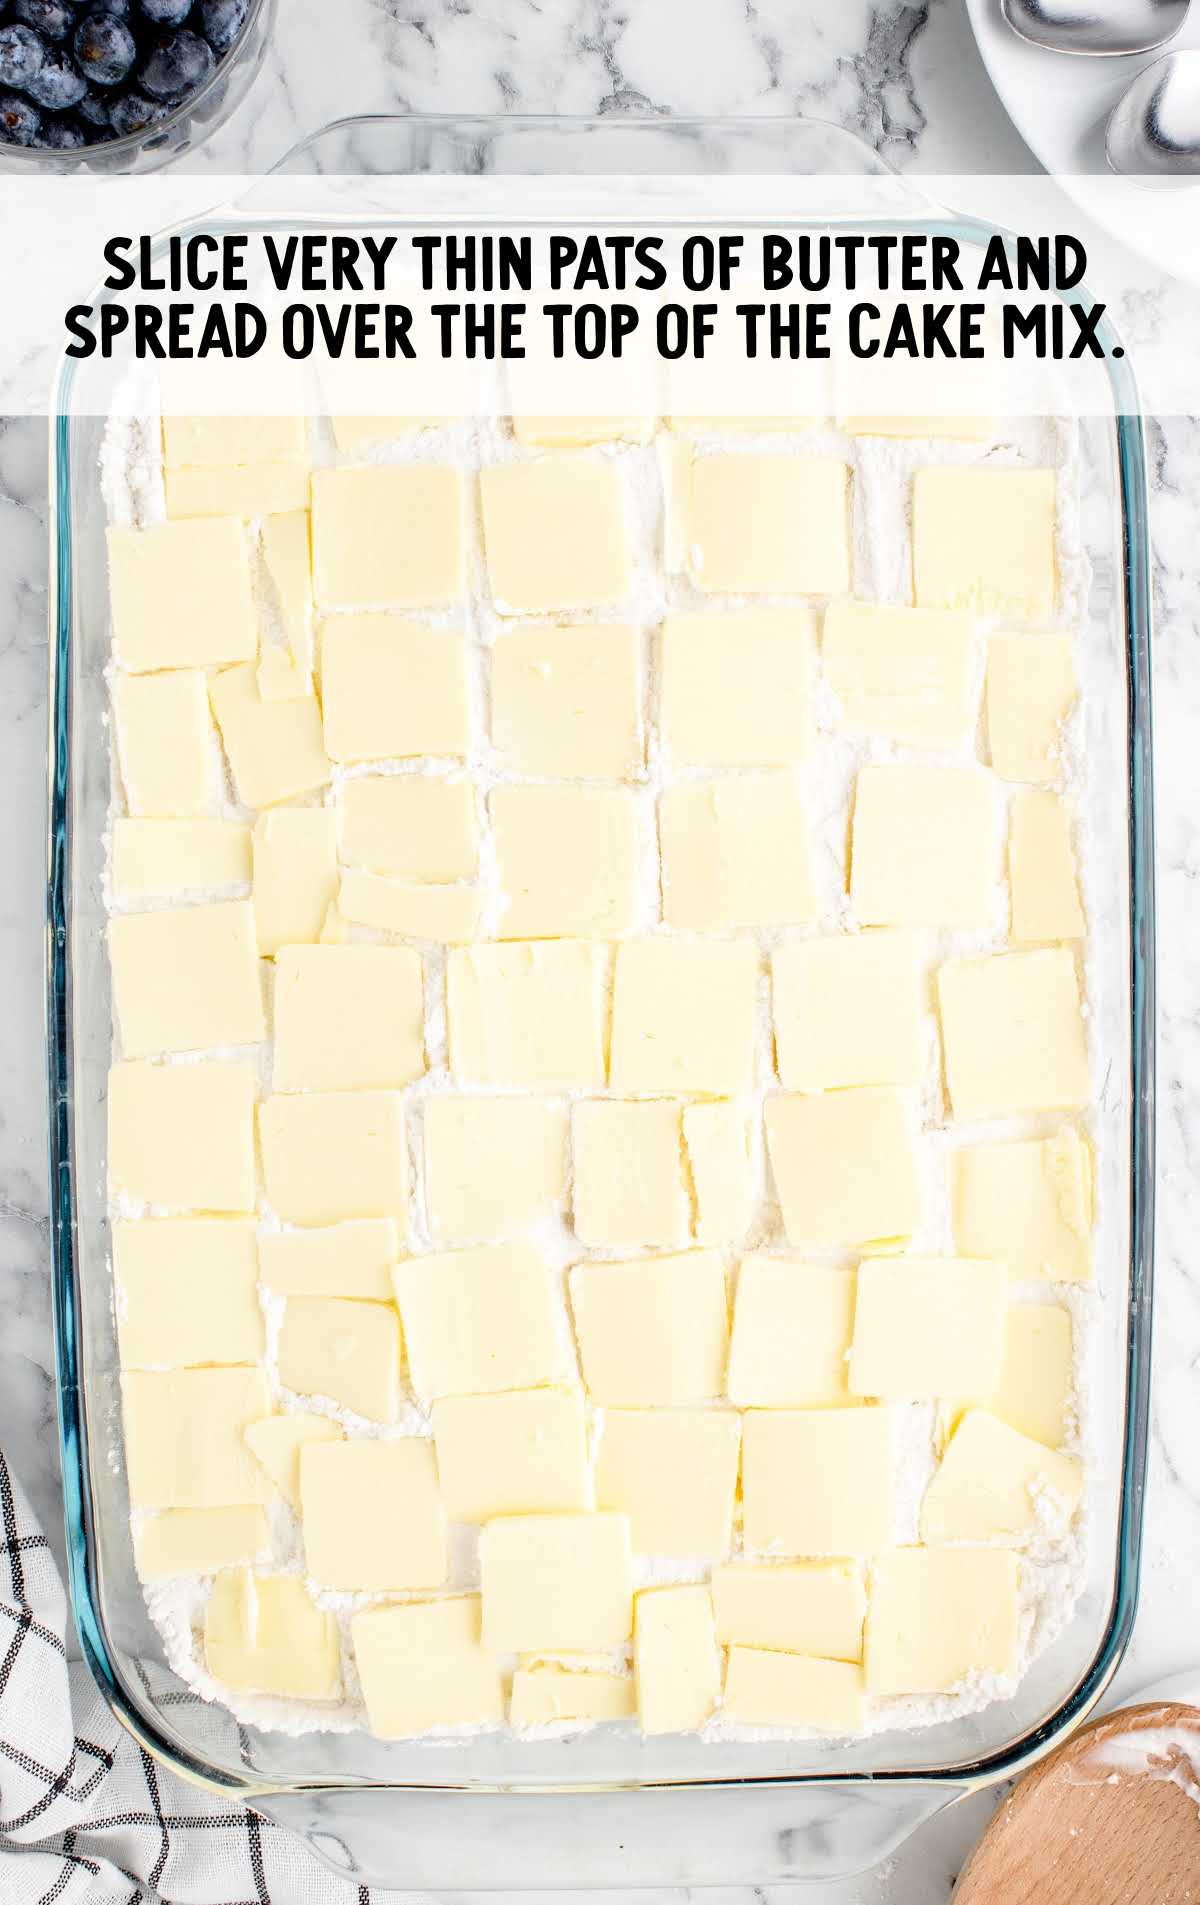 slices of butter spread over the top of the cake mix